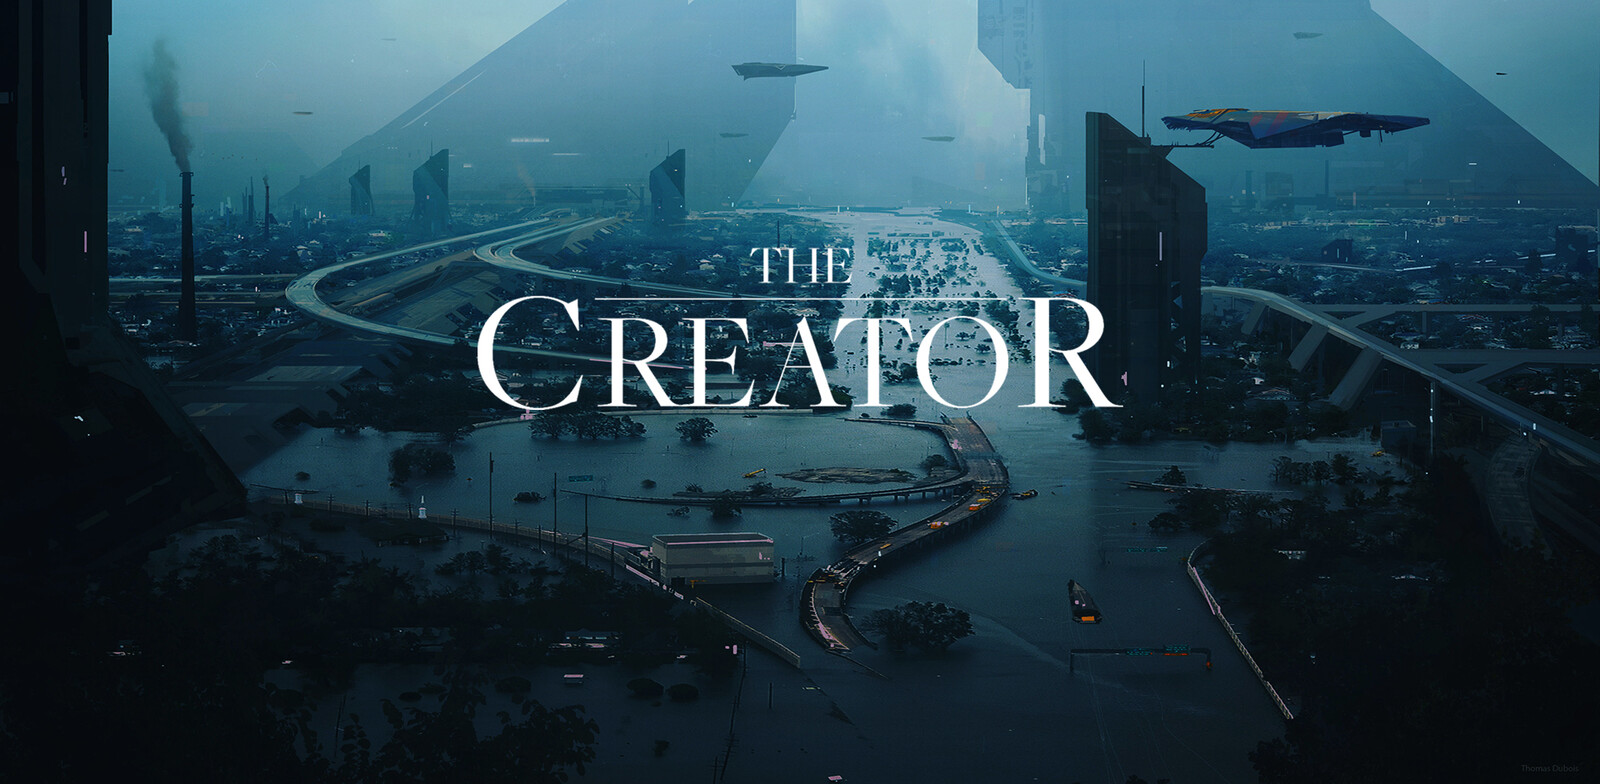 The Creator- Concepts